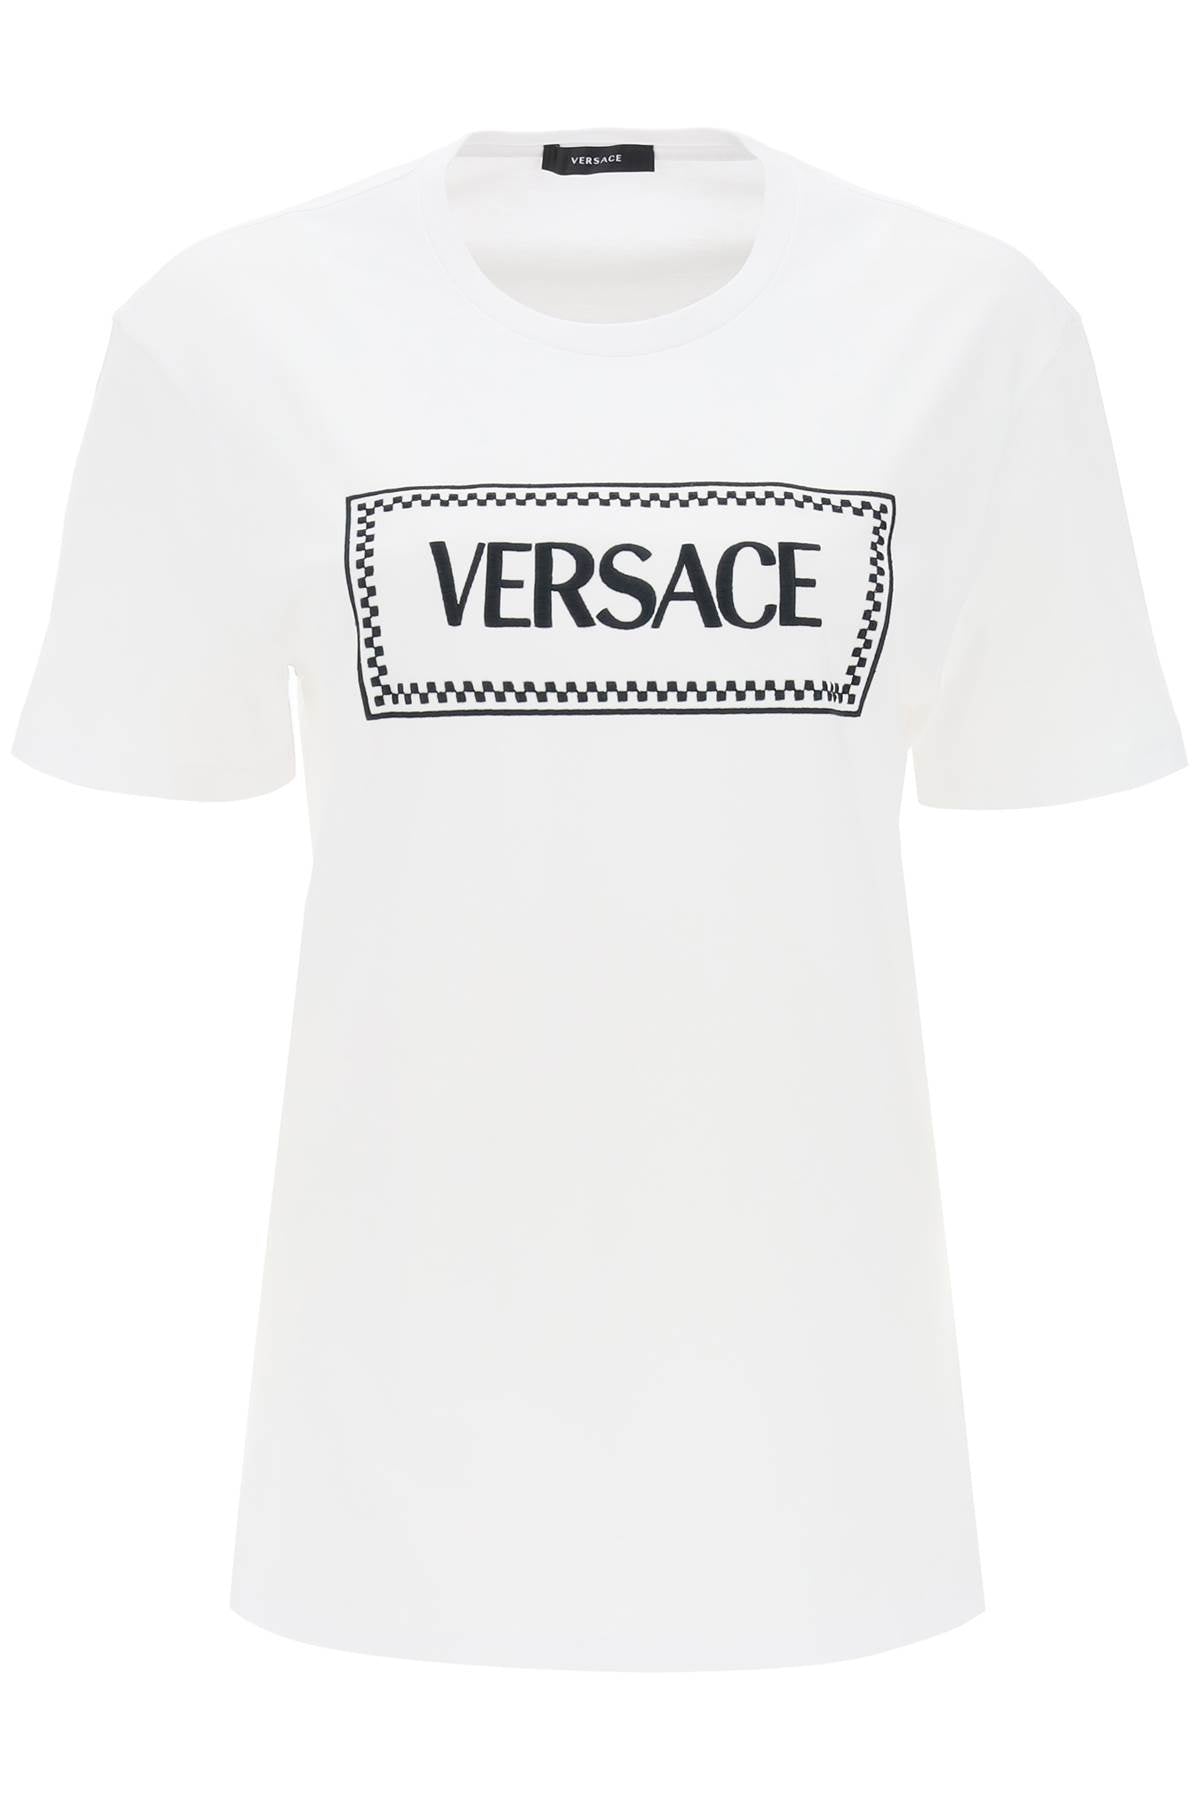 Versace t-shirt with logo embroidery-0